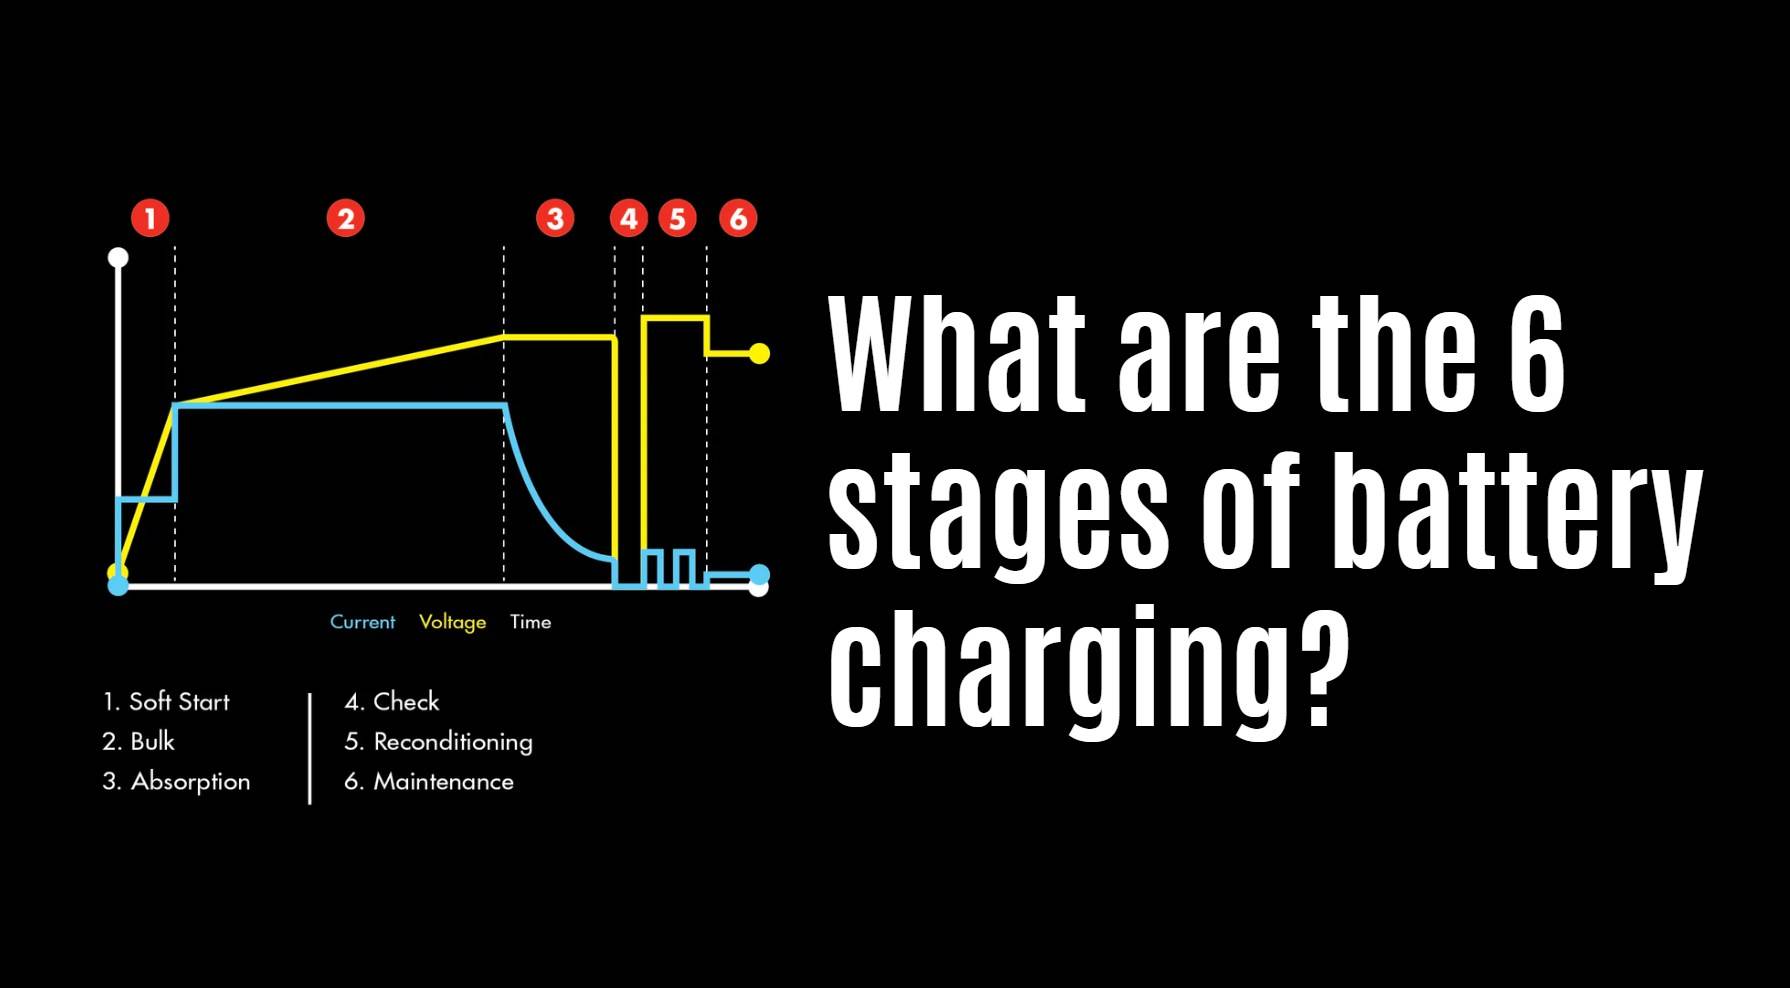 What are the 6 stages of battery charging?